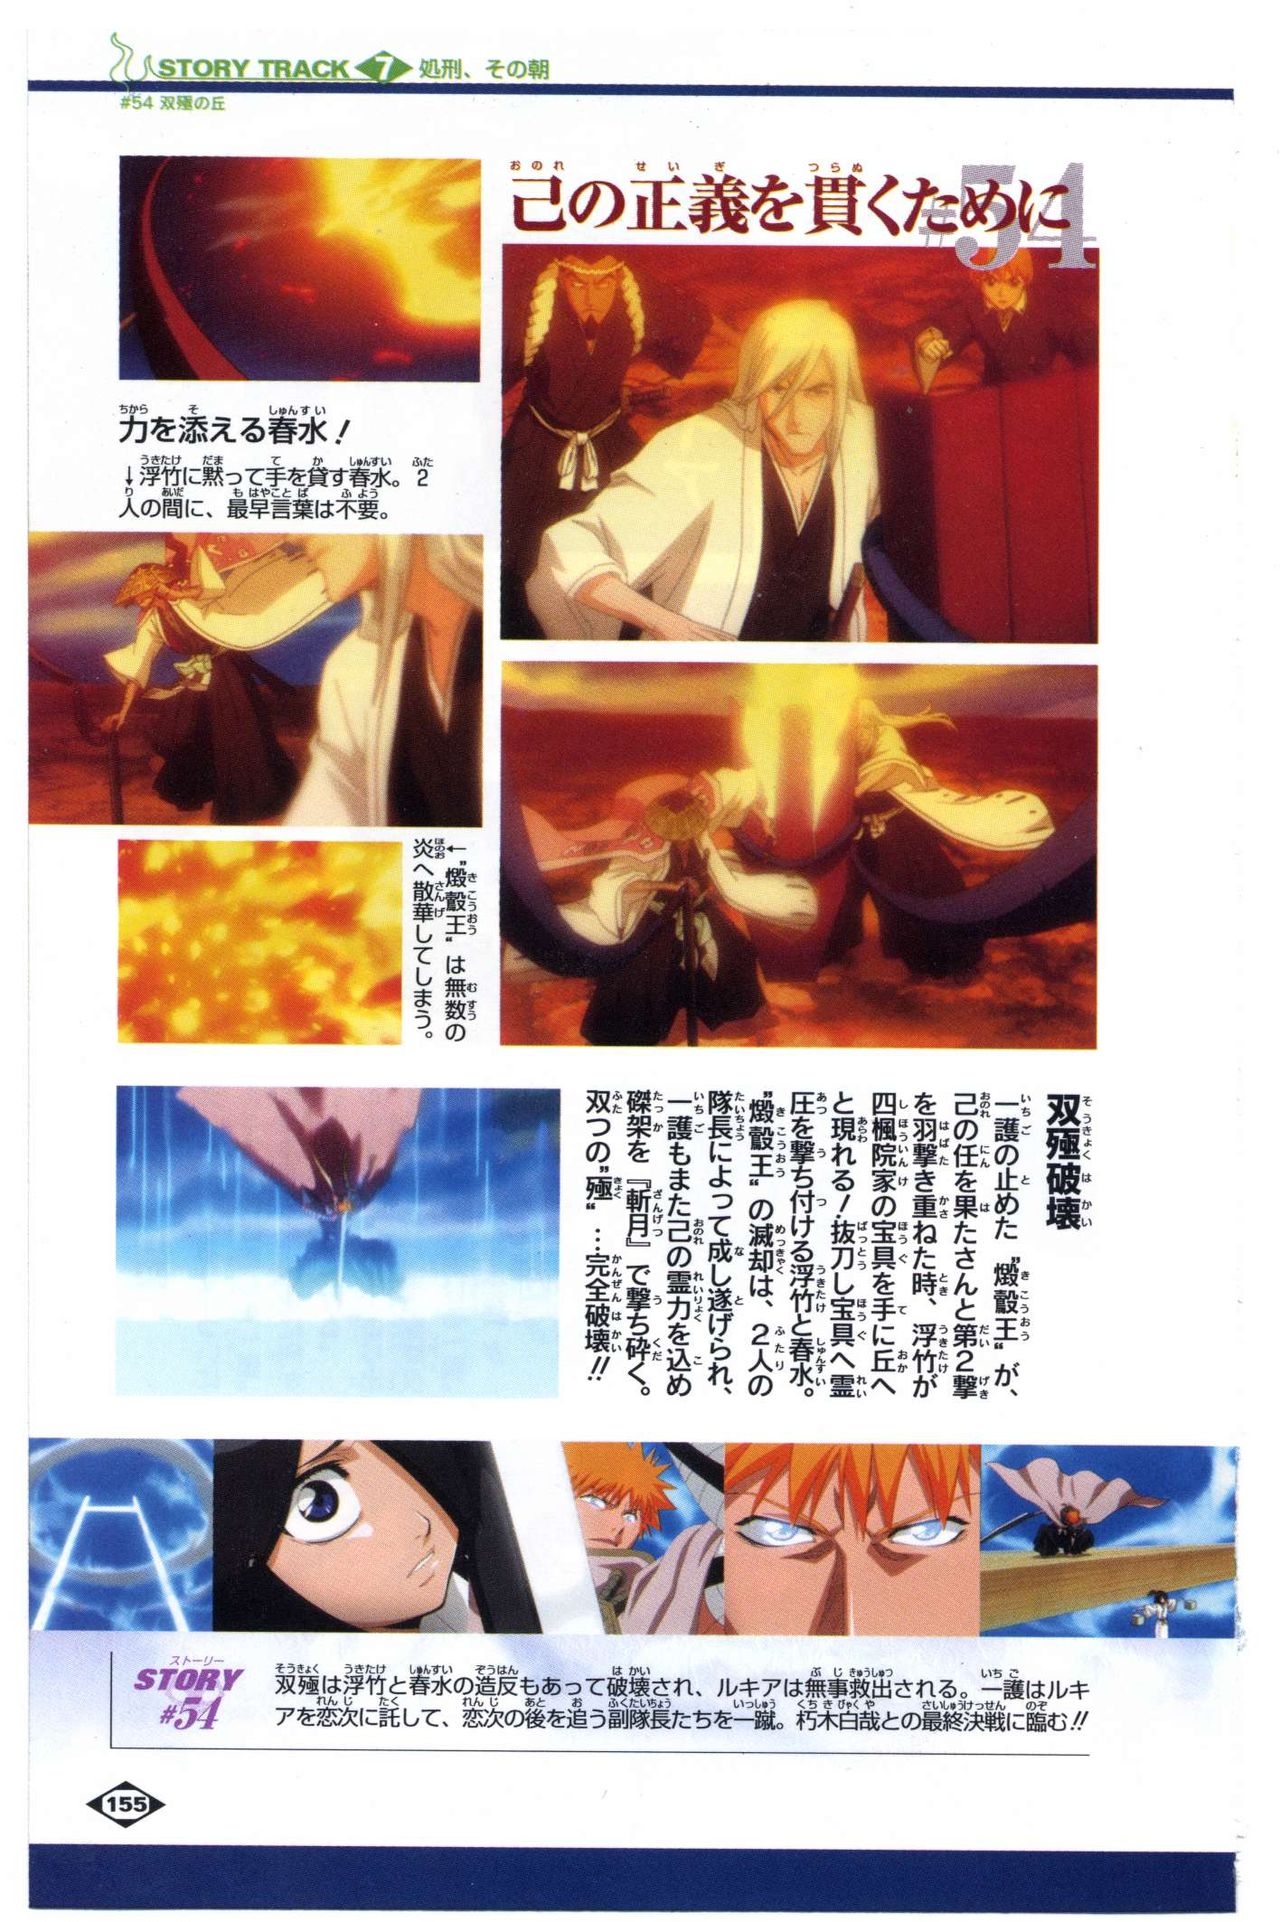 Bleach: Official Animation Book VIBEs 155